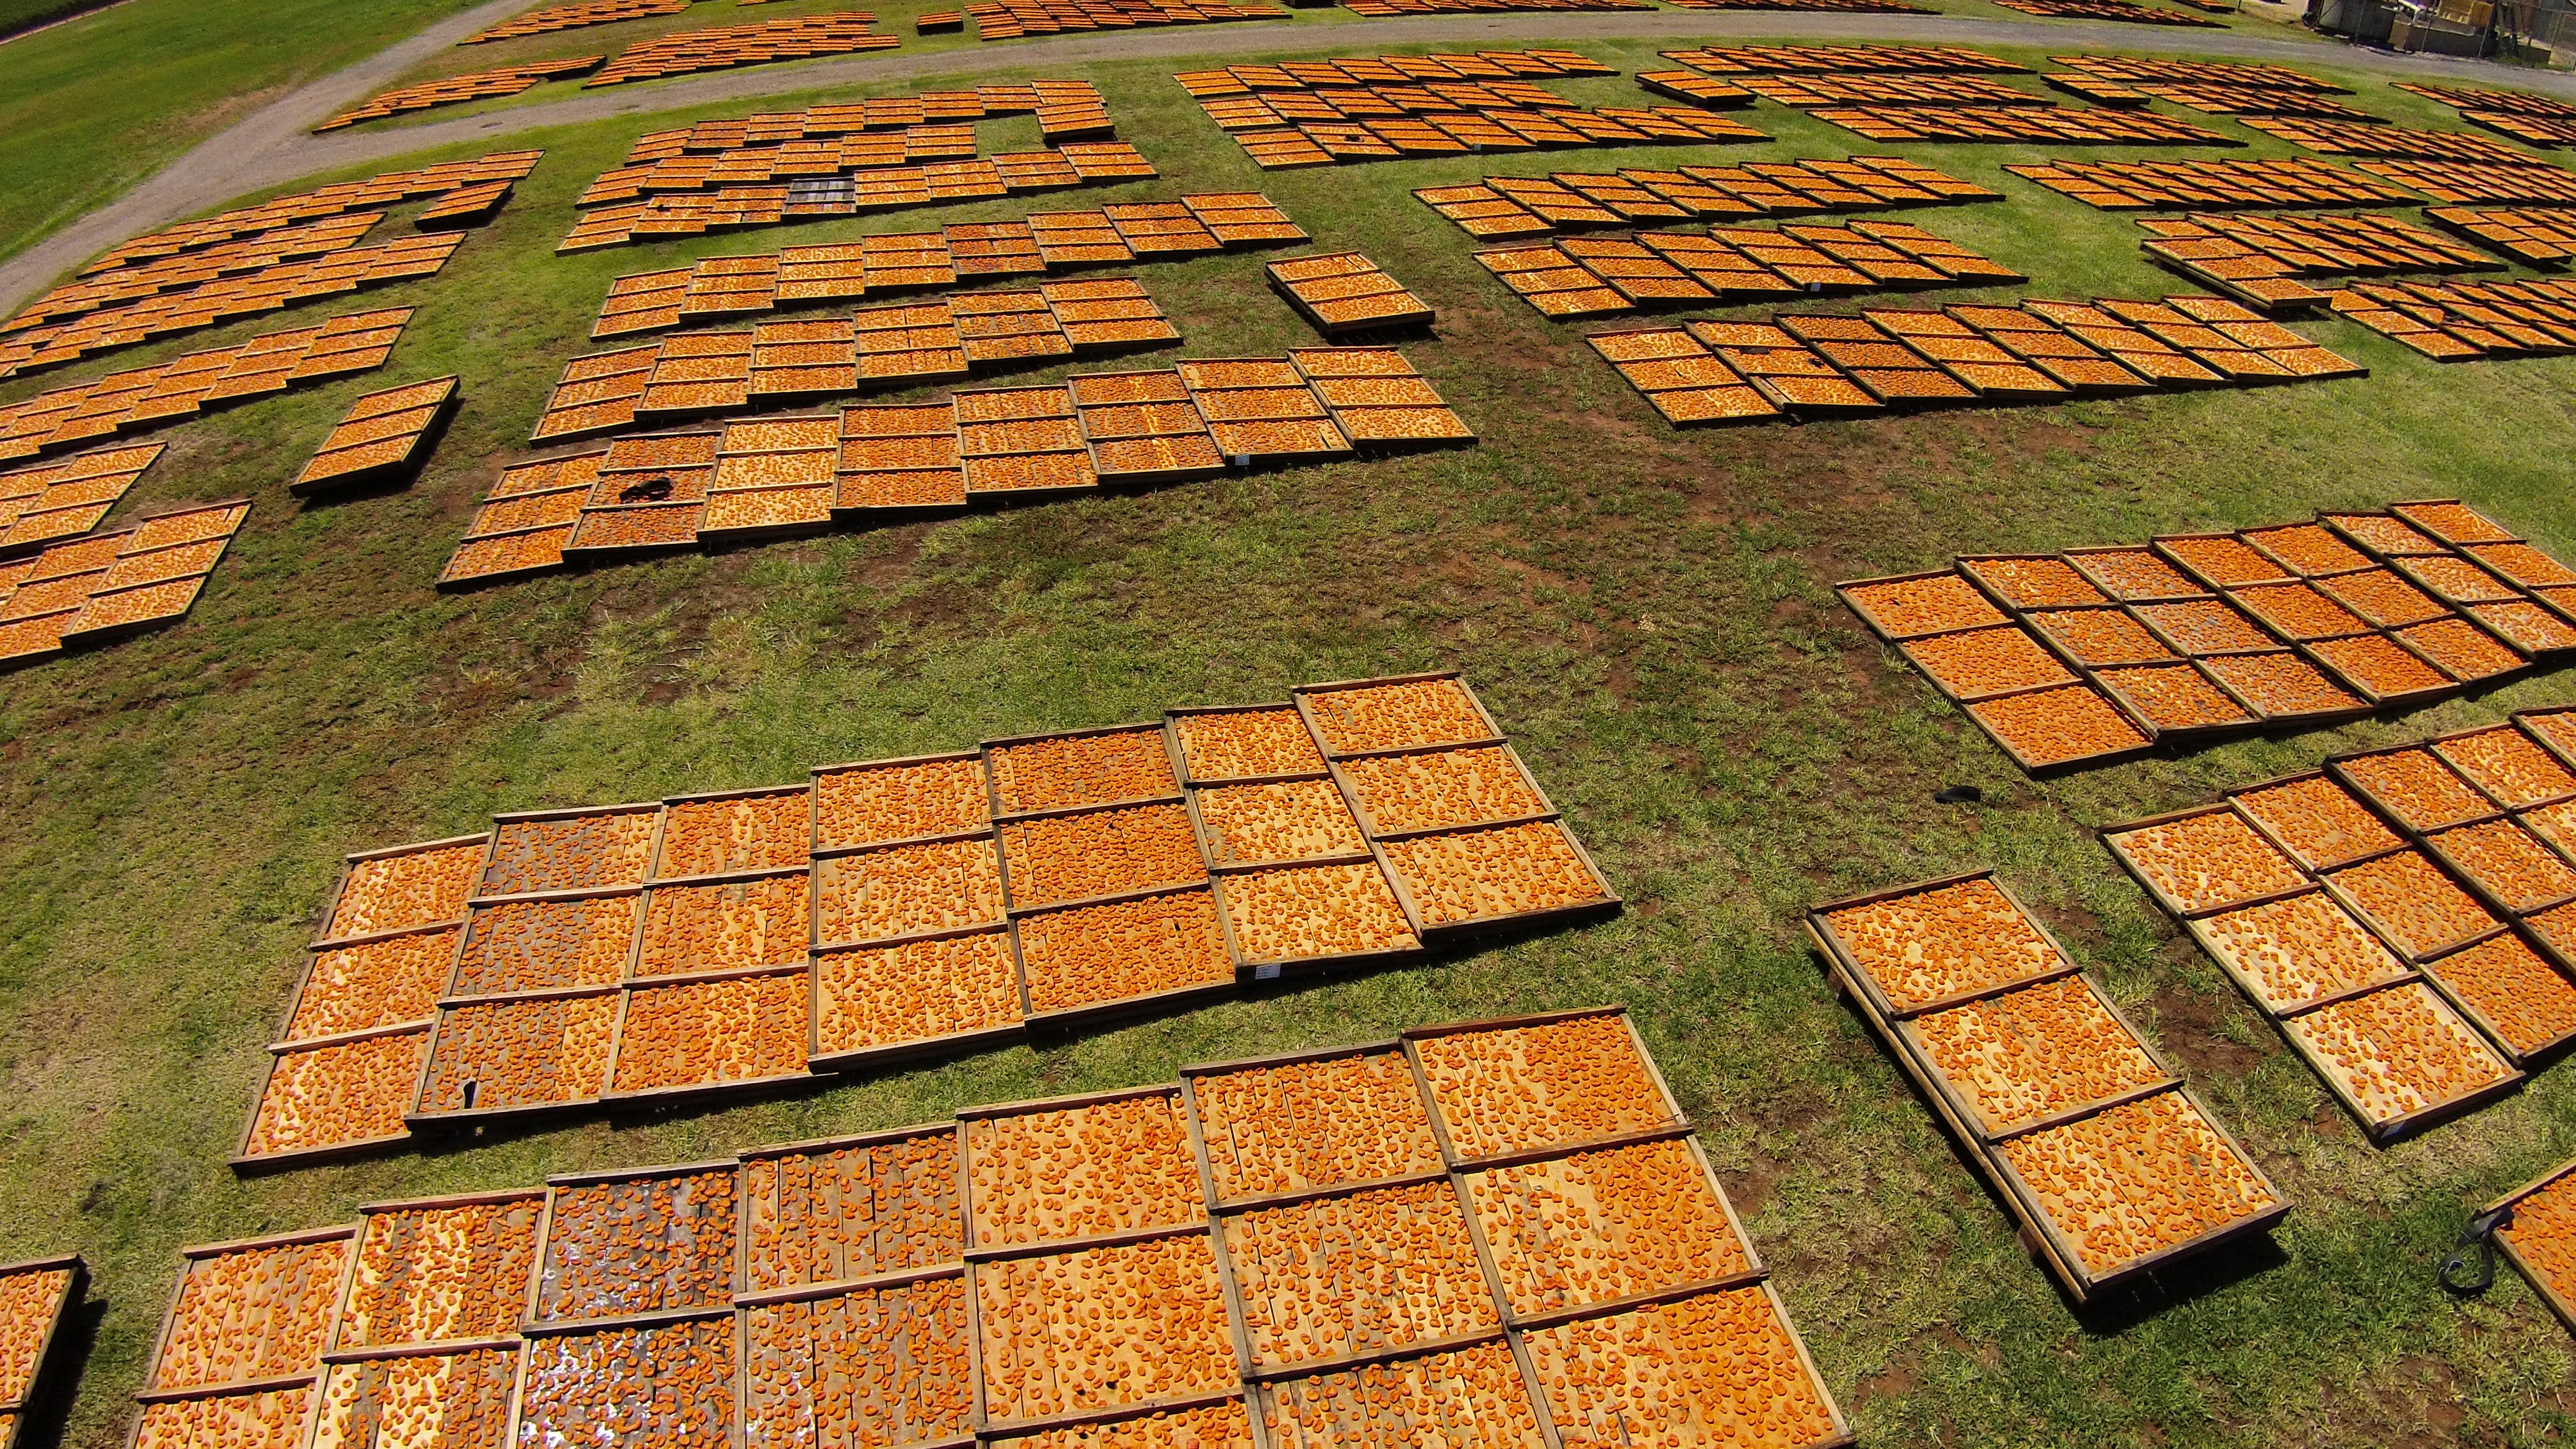 A photograph of a field with trays of apricots drying in the sun